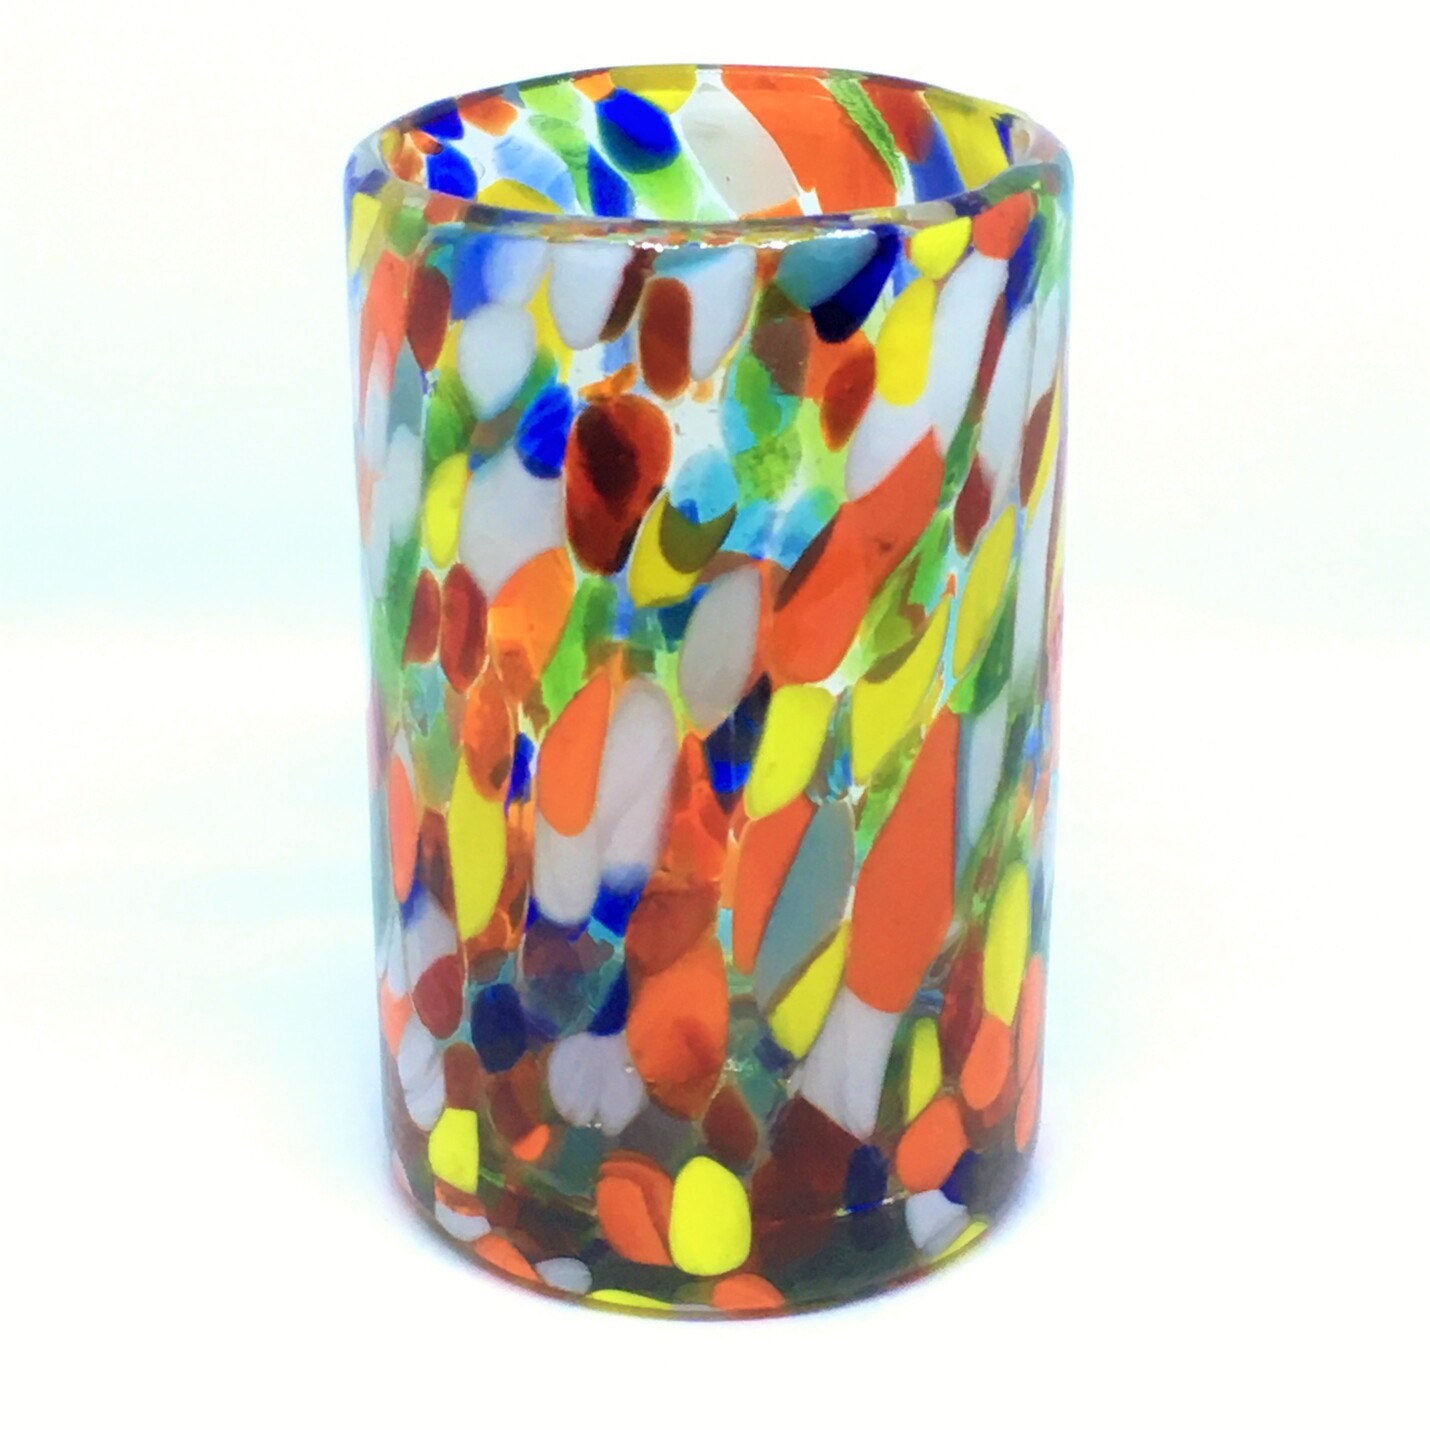 Mexican Glasses / Confetti Carnival 14 oz Drinking Glasses (set of 6) / Let the spring come into your home with this colorful set of glasses. The multicolor glass decoration makes them a standout in any place.